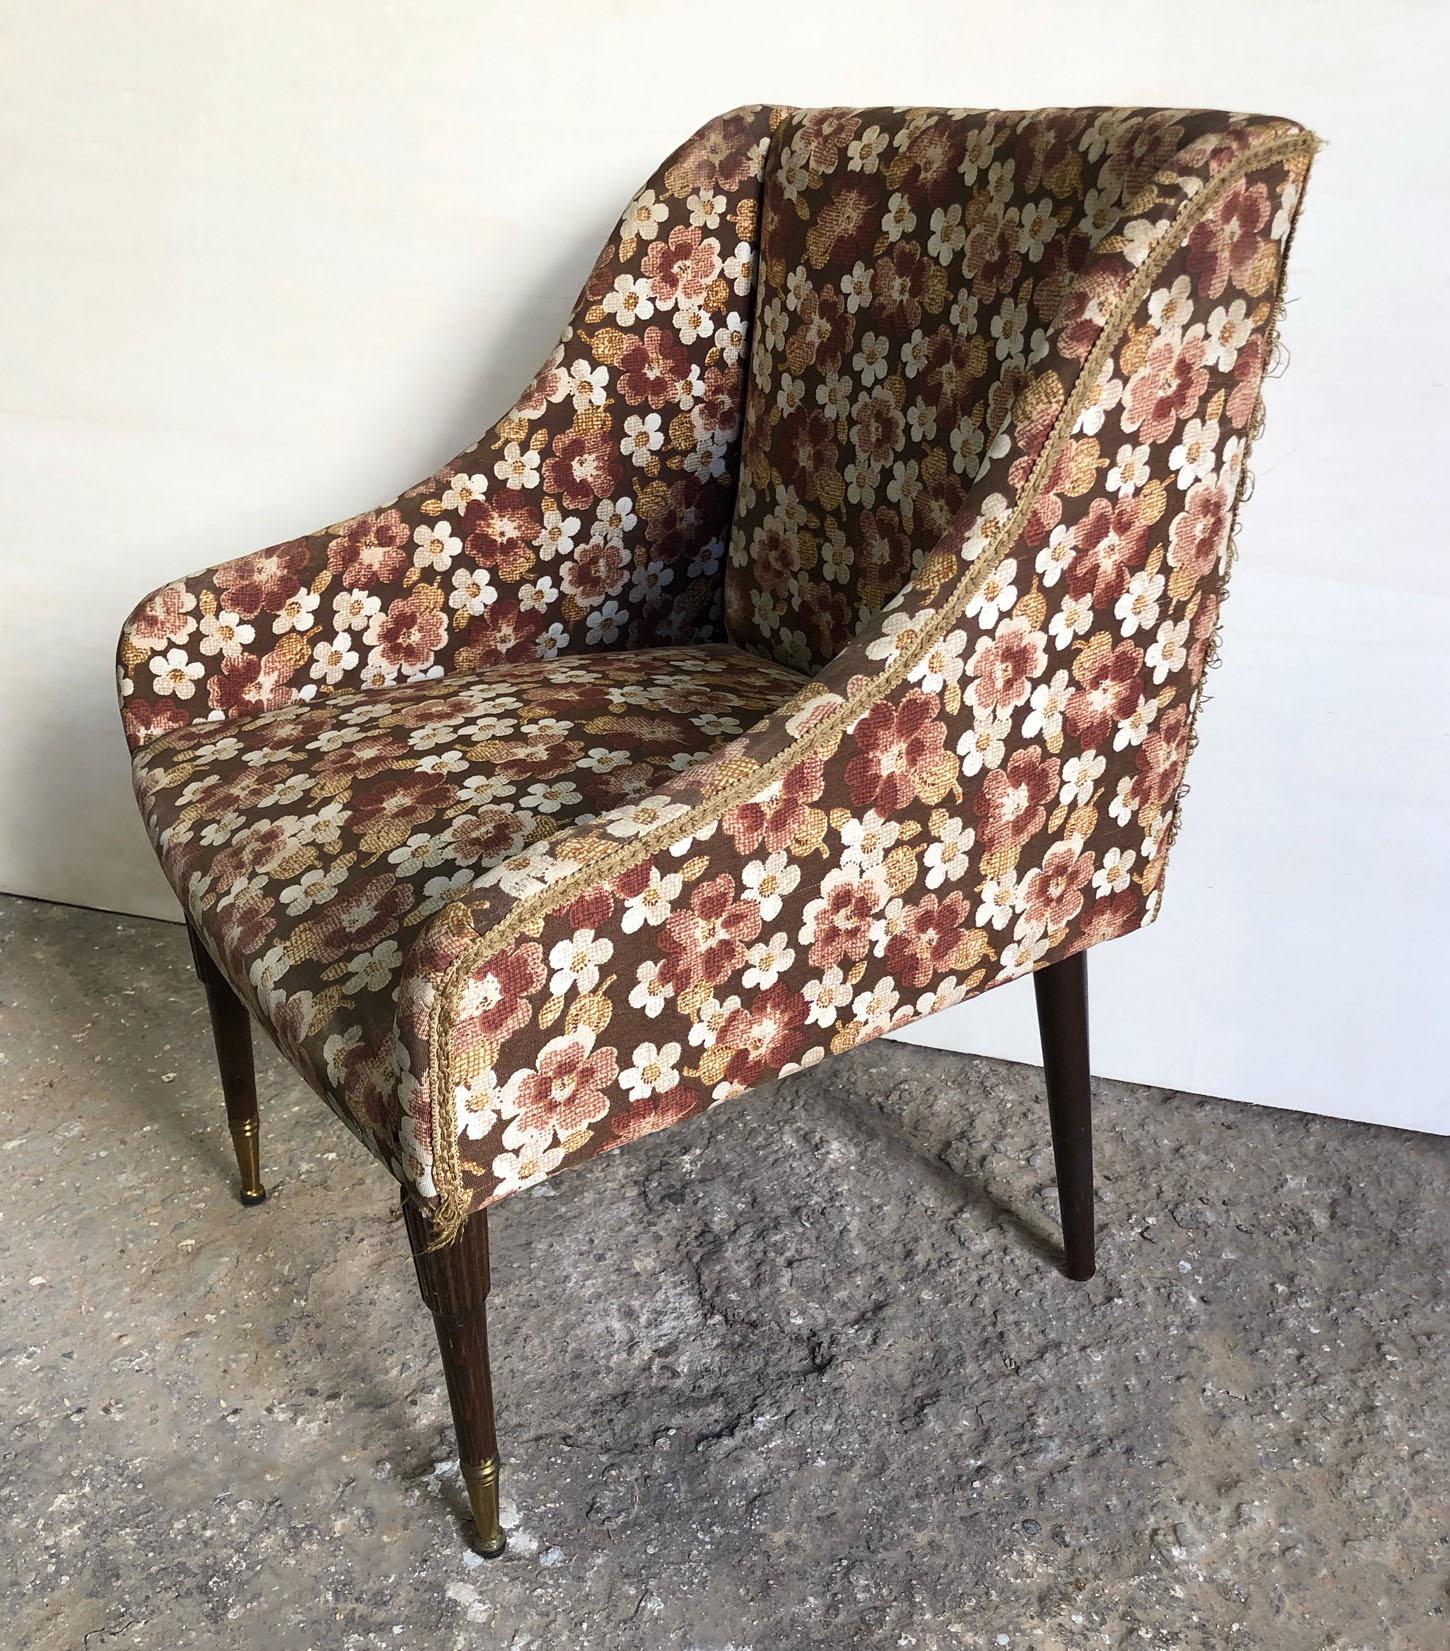 Original armchair from the 60s, fabric with floral motif.
Italian design.
Comes from an old country house in the Chianti area of Tuscany.
As shown in the photographs and videos, there are no imperfect spots.
To find out the cost of transport to your